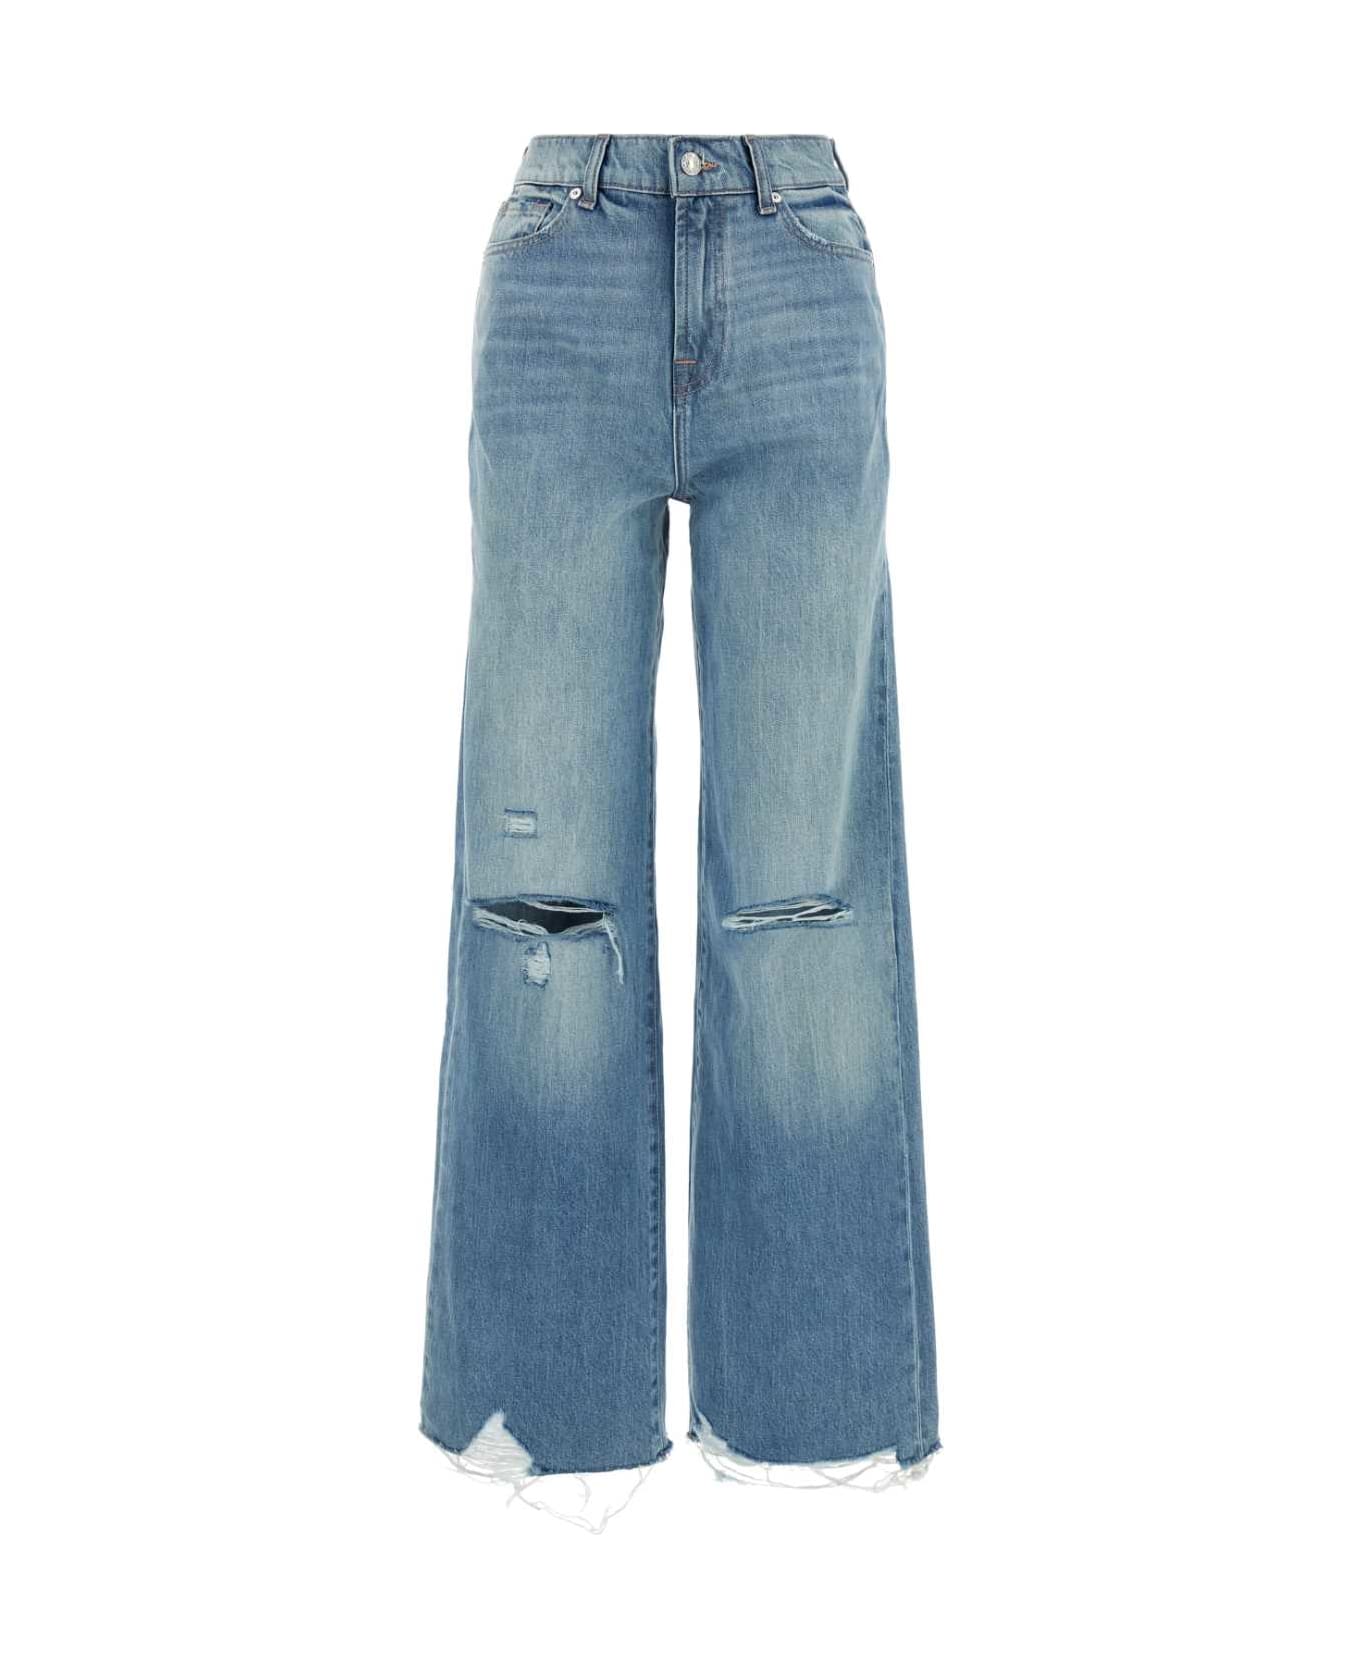 7 For All Mankind Denim Scout Wide-leg Jeans - Blue